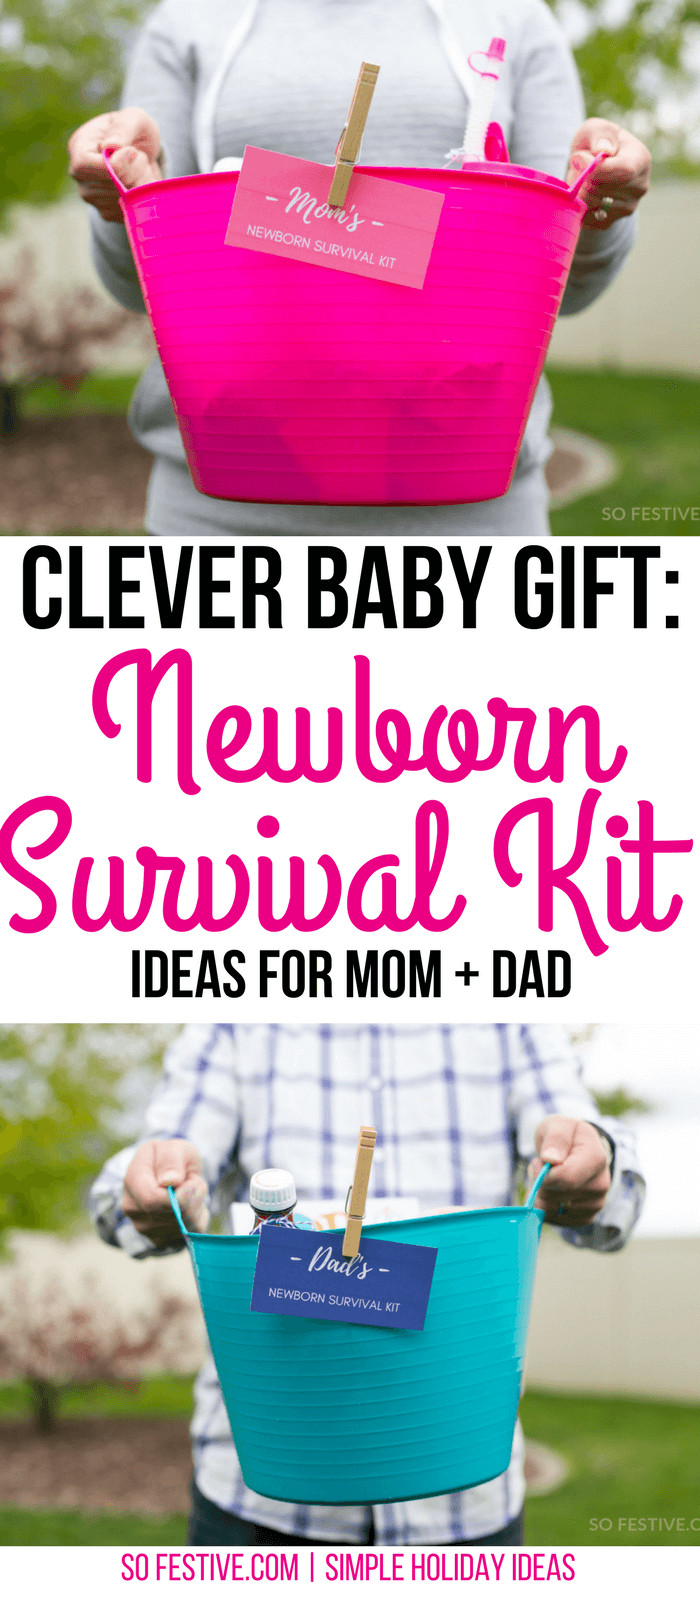 Gift Ideas For Family With New Baby
 Newborn Survival Kit Baby Gift For Parents So Festive